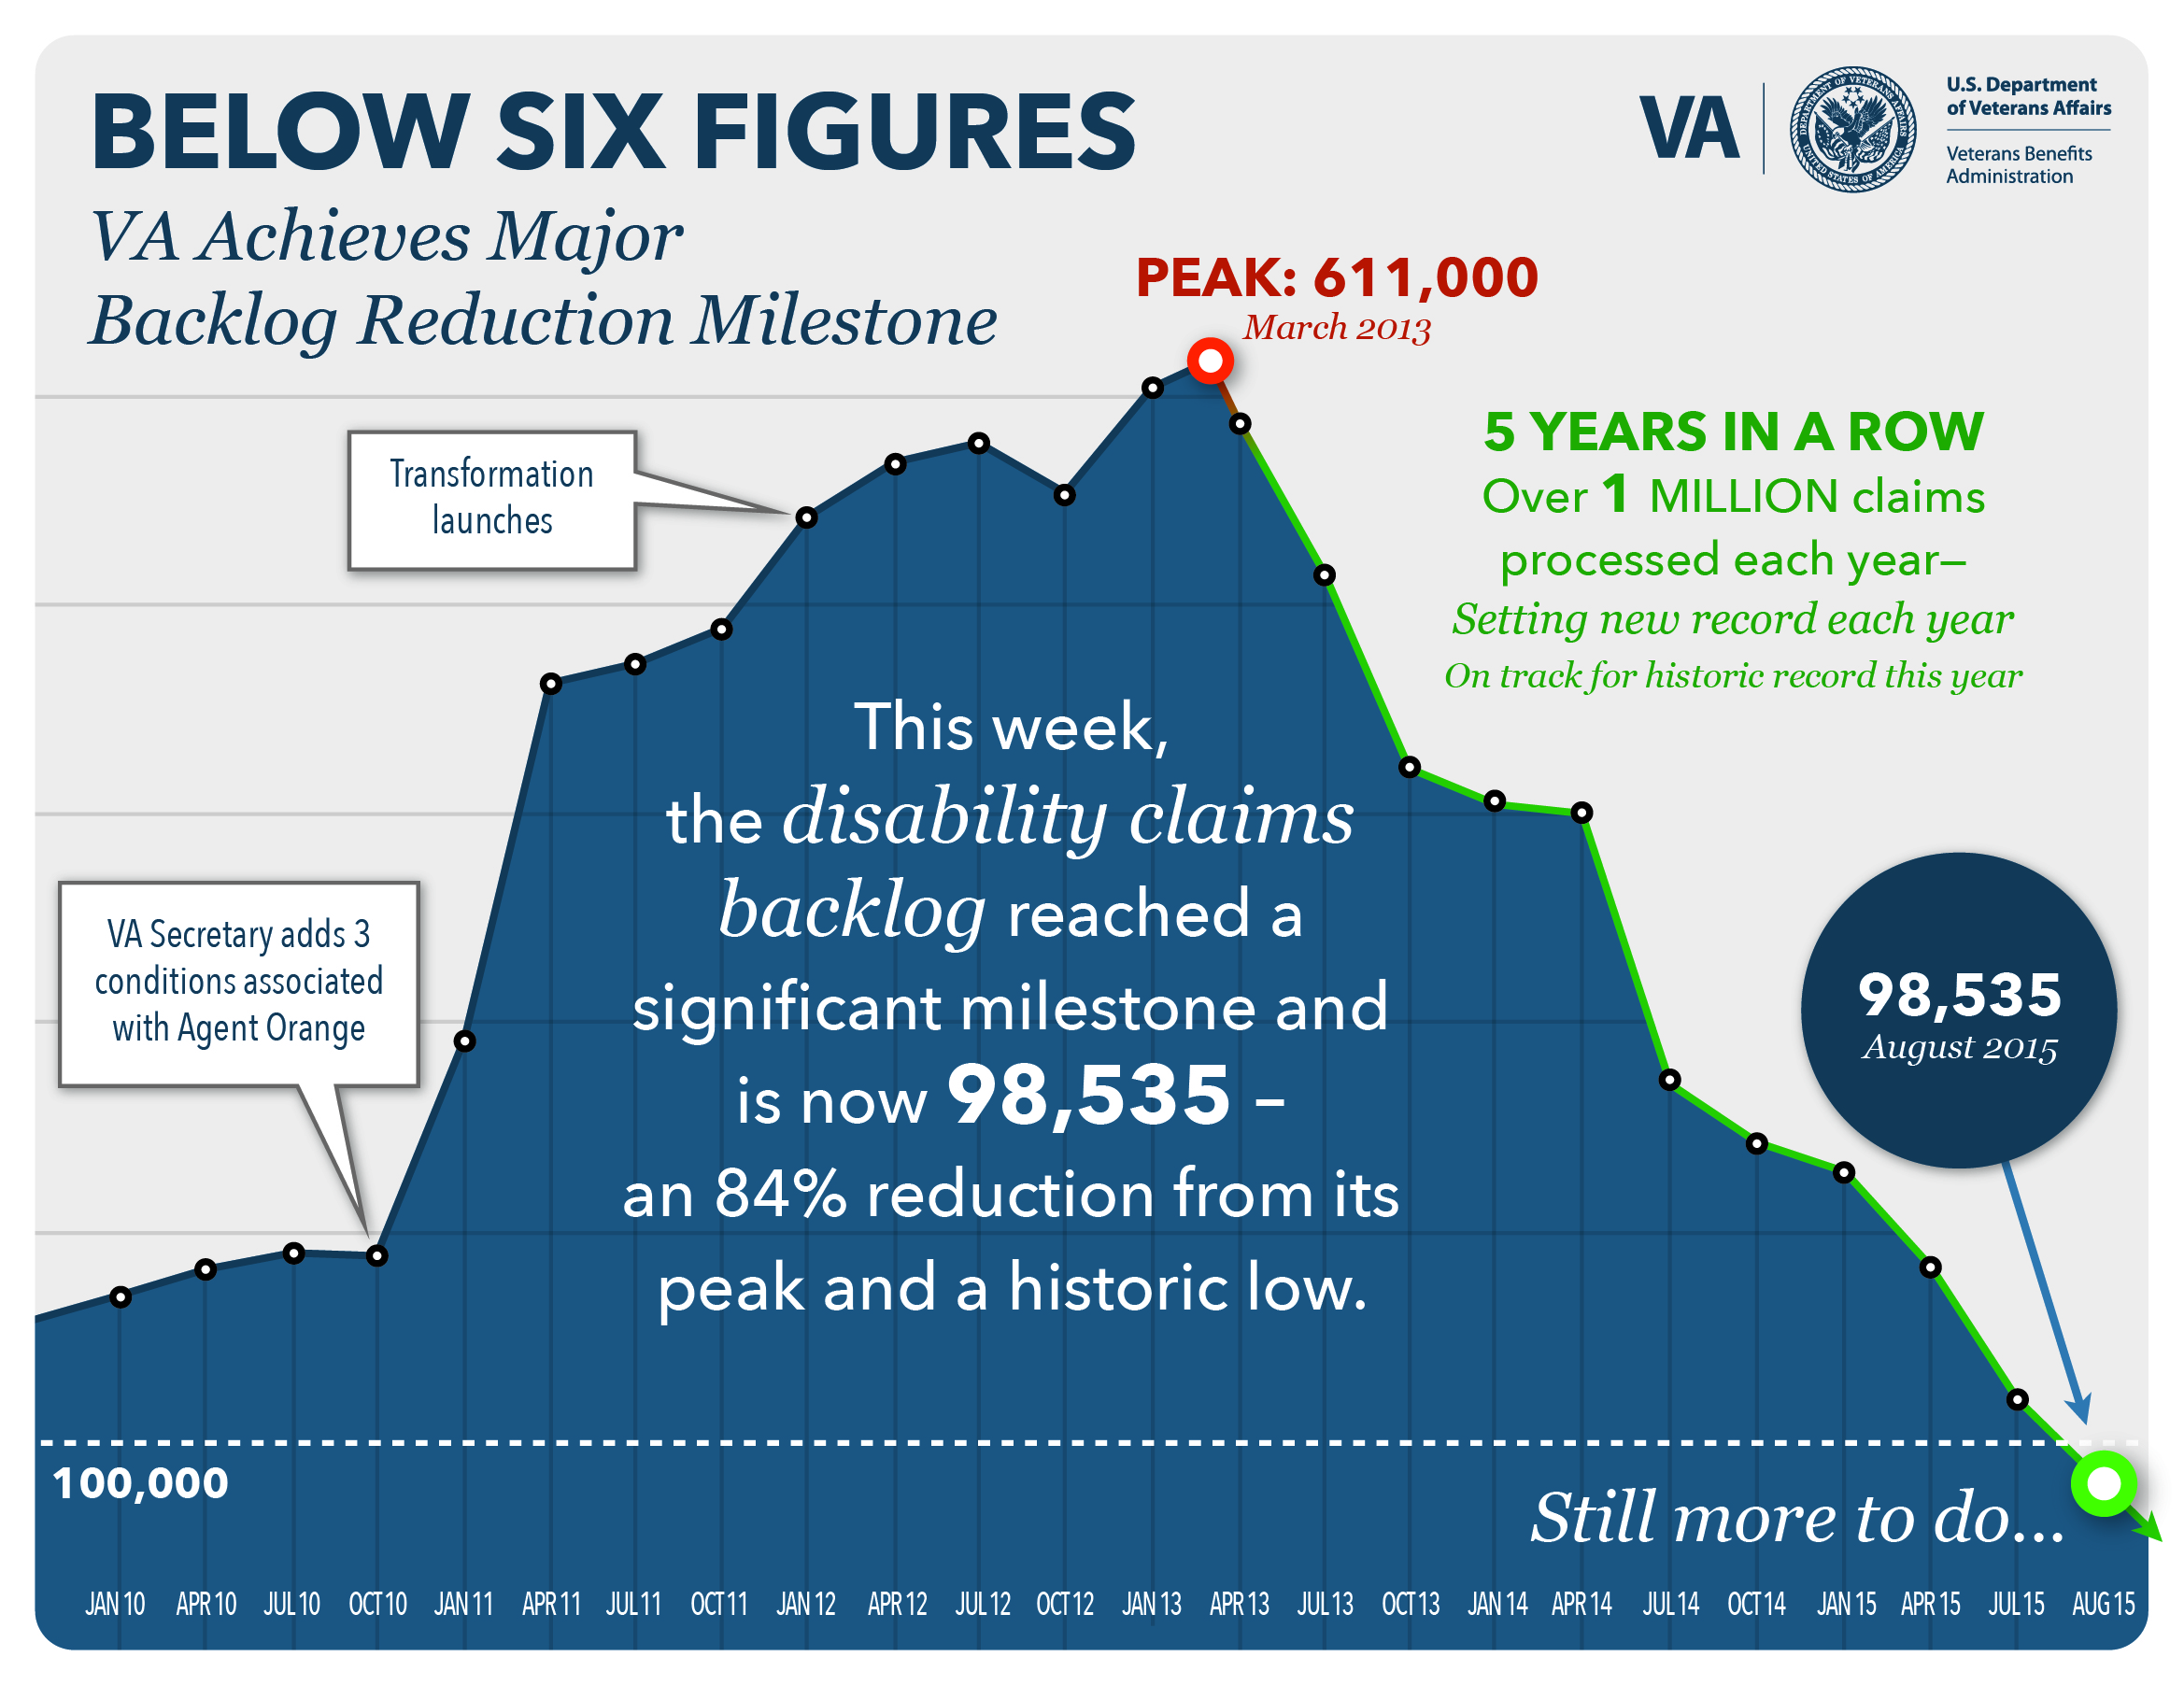 Below Six Figures. VA Achives Major Backlog Reduction Milestone. This week, the disability claims backlog reached a significant milestone and is now 98,535 - an 84% reduction from its peak and a historic low. PEAK: 611,000 March 2013. 5 YEARS IN A ROW, Over 1 millions claims processed each year - setting new record each year. On track for historic record this year. 98,535 August 2015. Still more to do...